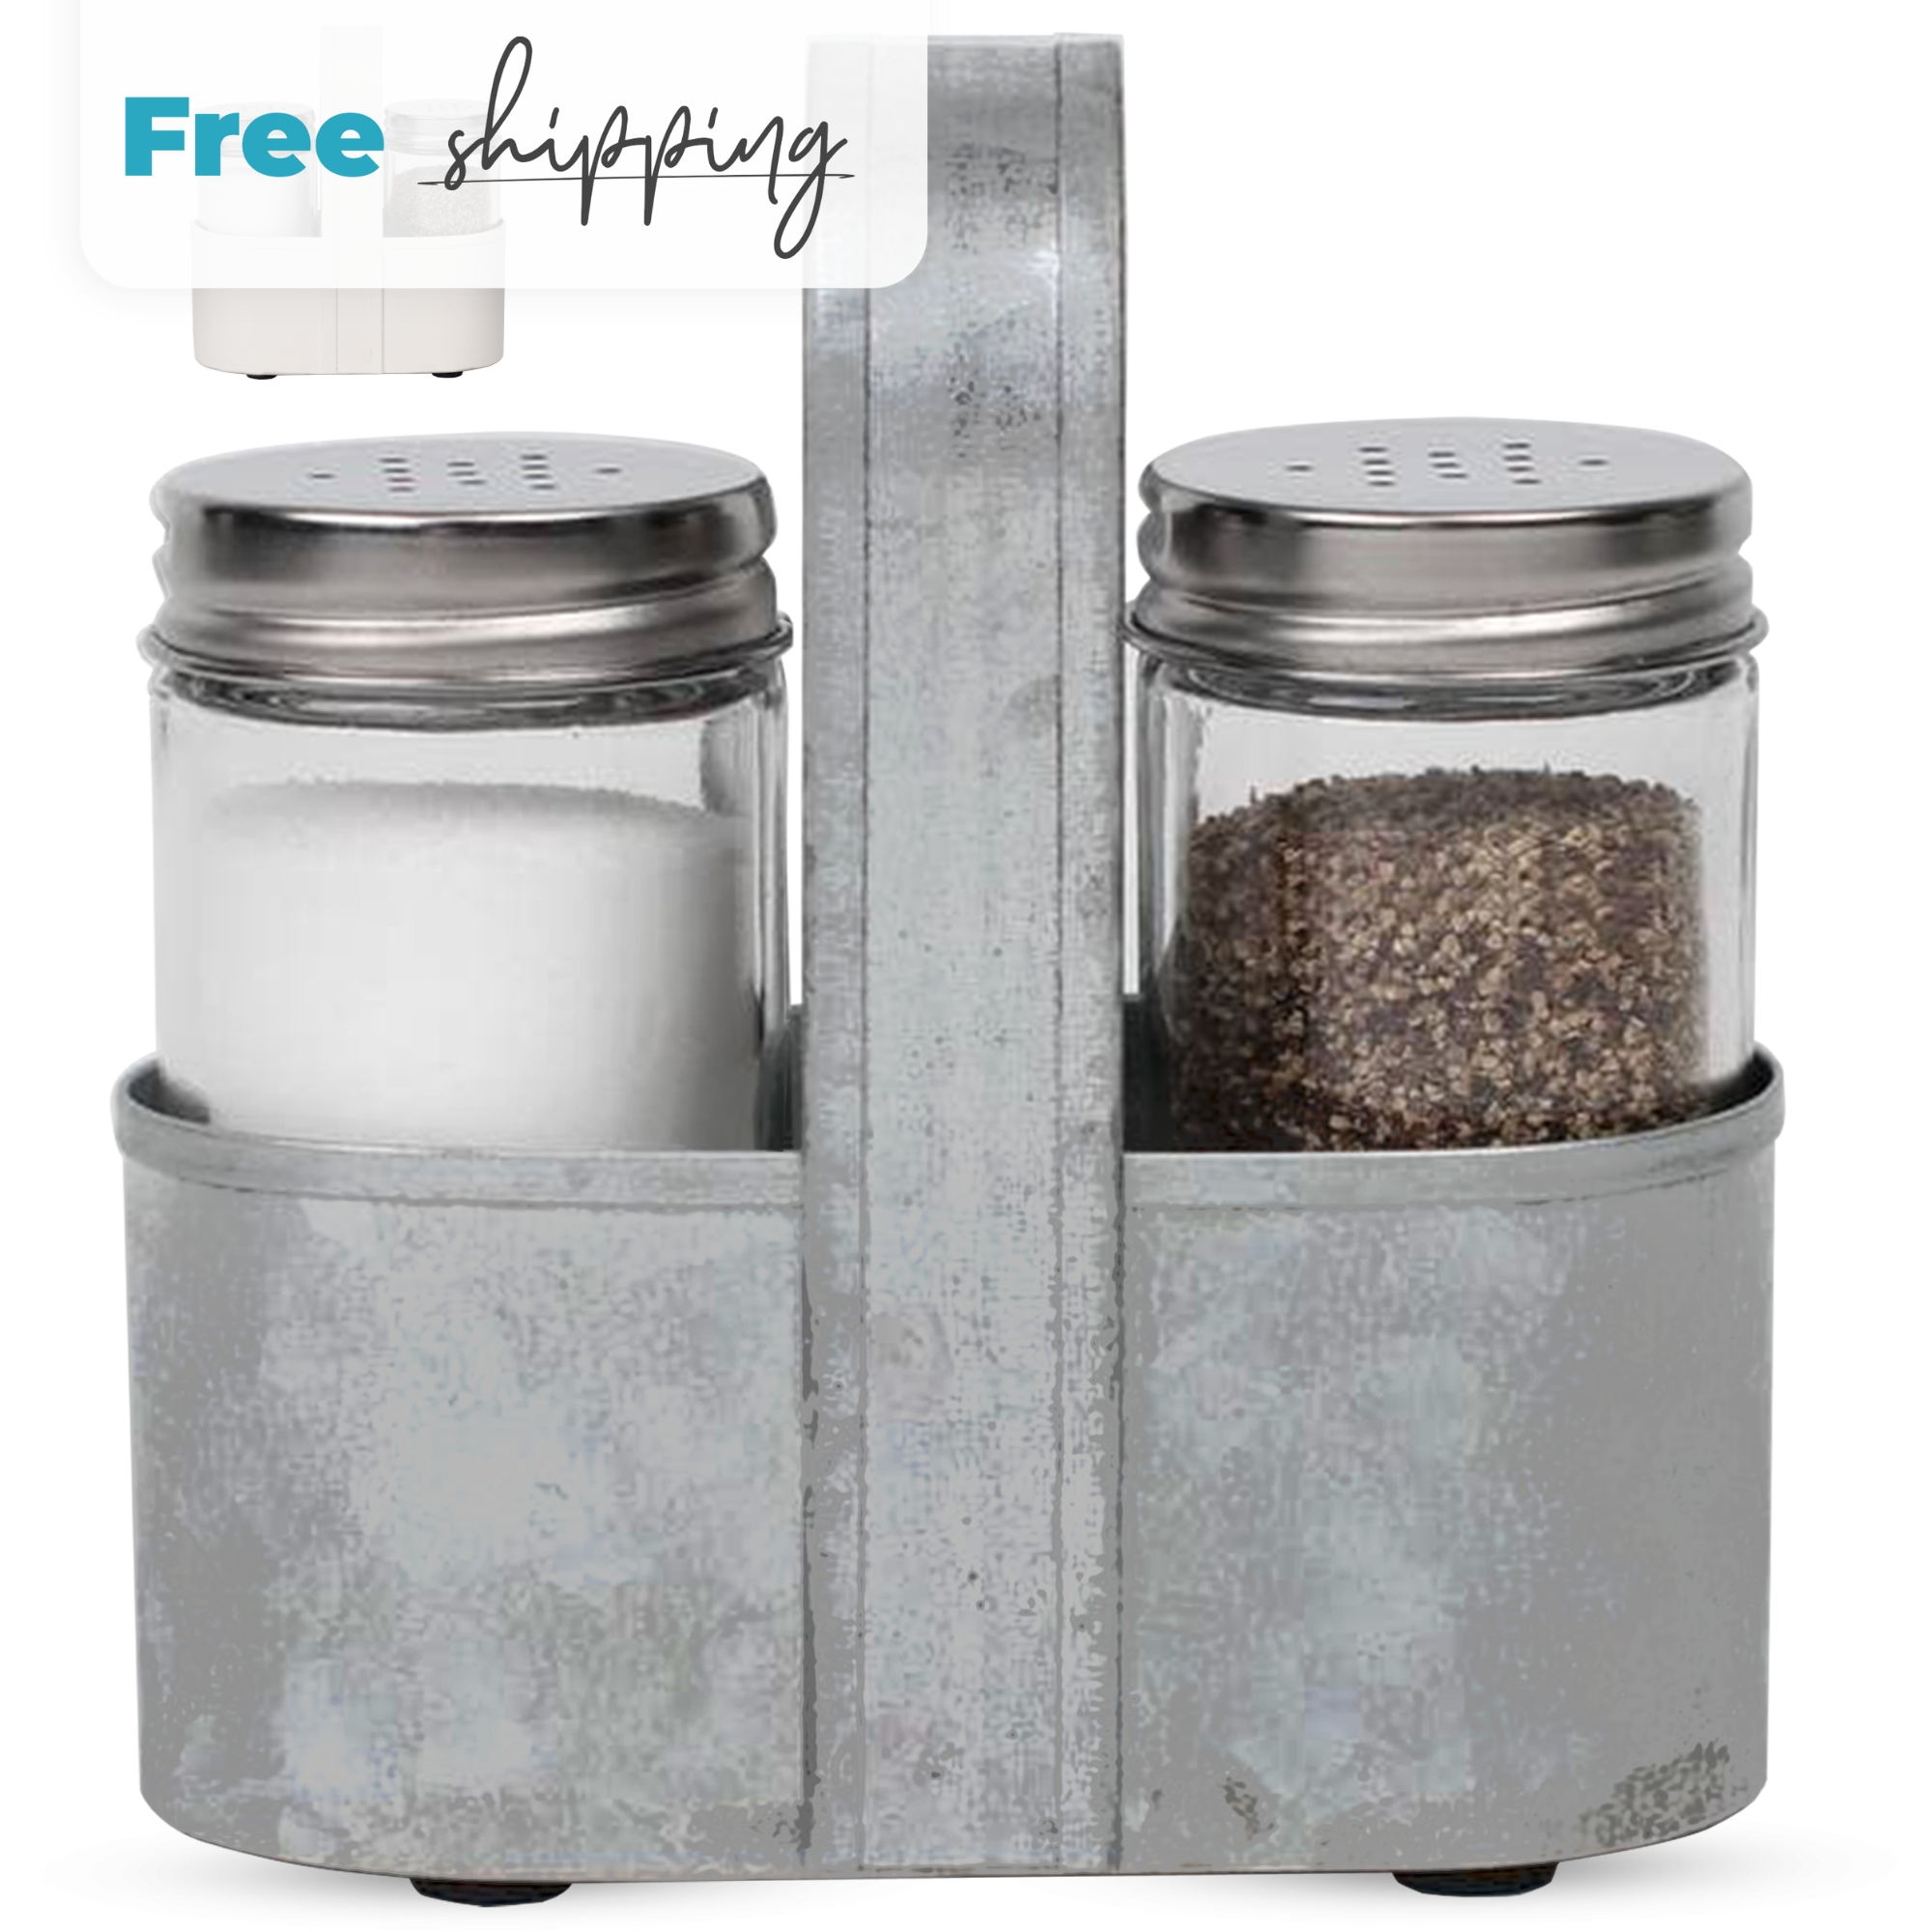 Galvanized Salt and Pepper shakers set by Saratoga Home